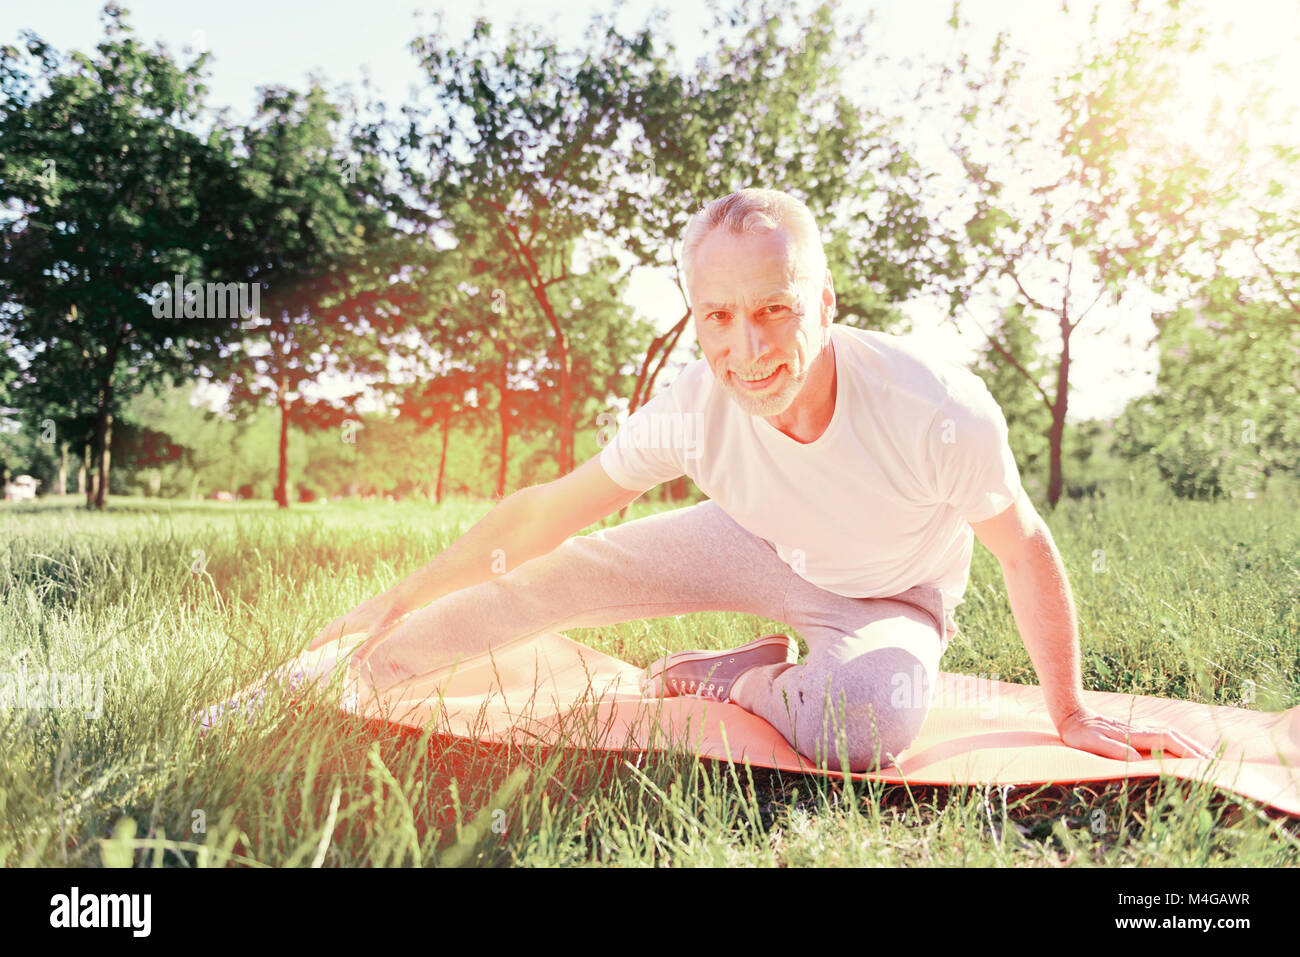 Enthusiastic man doing exercises on the ground pad Stock Photo